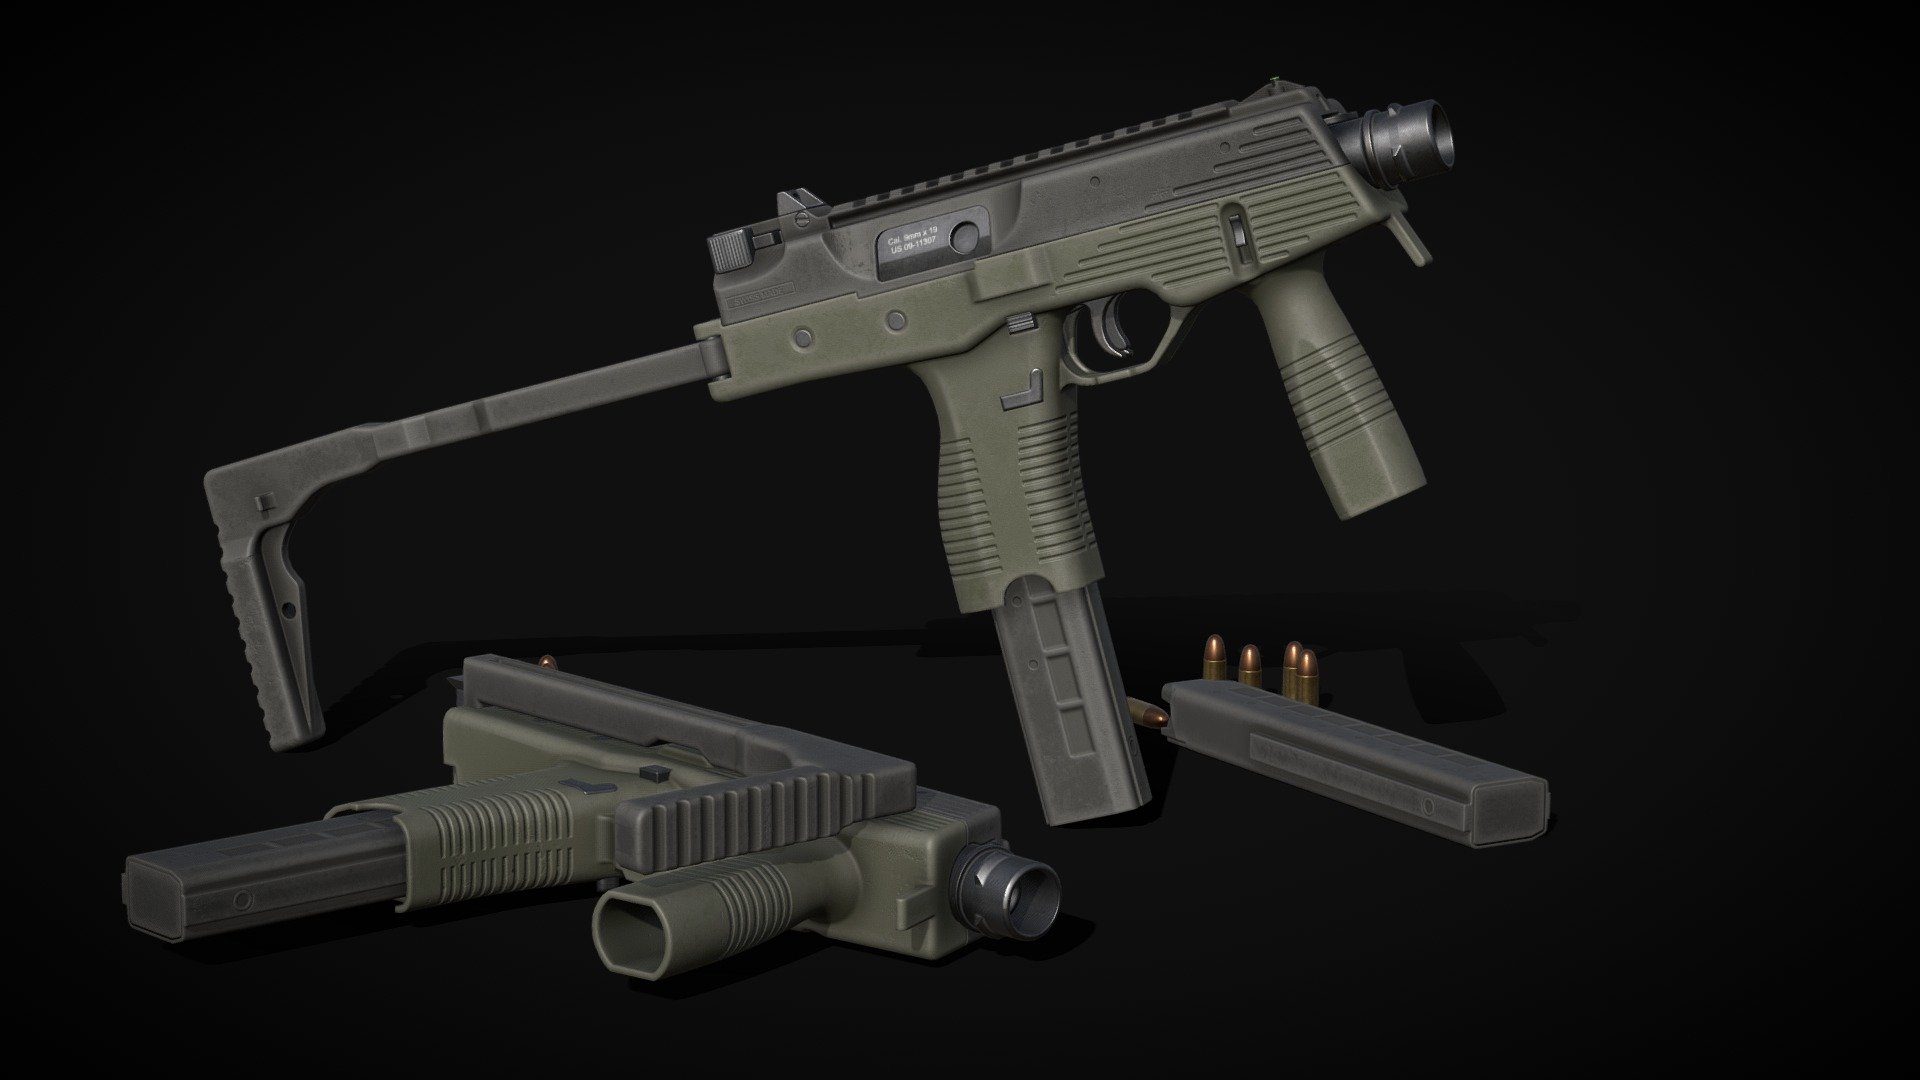 Blend files included:


Final lowpoly MP9 blend file
Extra blend file that includes the basemesh, highpoly and the lowpoly

Model is ready for rigging, separated parts include:


charging handle
bolt release lever
bolt
folding stock
stock latch
stock locking bar
stock 
trigger
fire selector
magazine
magazine follower
magazine release
9x19mm bullet
9x19mm shell

Textures included:


4K PBR Textures (Basecolor, Normal OpenGL, Metallic, Roughness, Ambient Occlusion, Emissive)
Fake brand (Thame &amp; Braun) and brandless texture versions
Baked Untextured 4K textures (Normal, World Space Normal, Ambient Occlusion, Curvature, Position, Thickness) for custom texturing in substance etc.

Note: The textures are optimised for 2K - MP9 - Buy Royalty Free 3D model by FireWarden 3d model